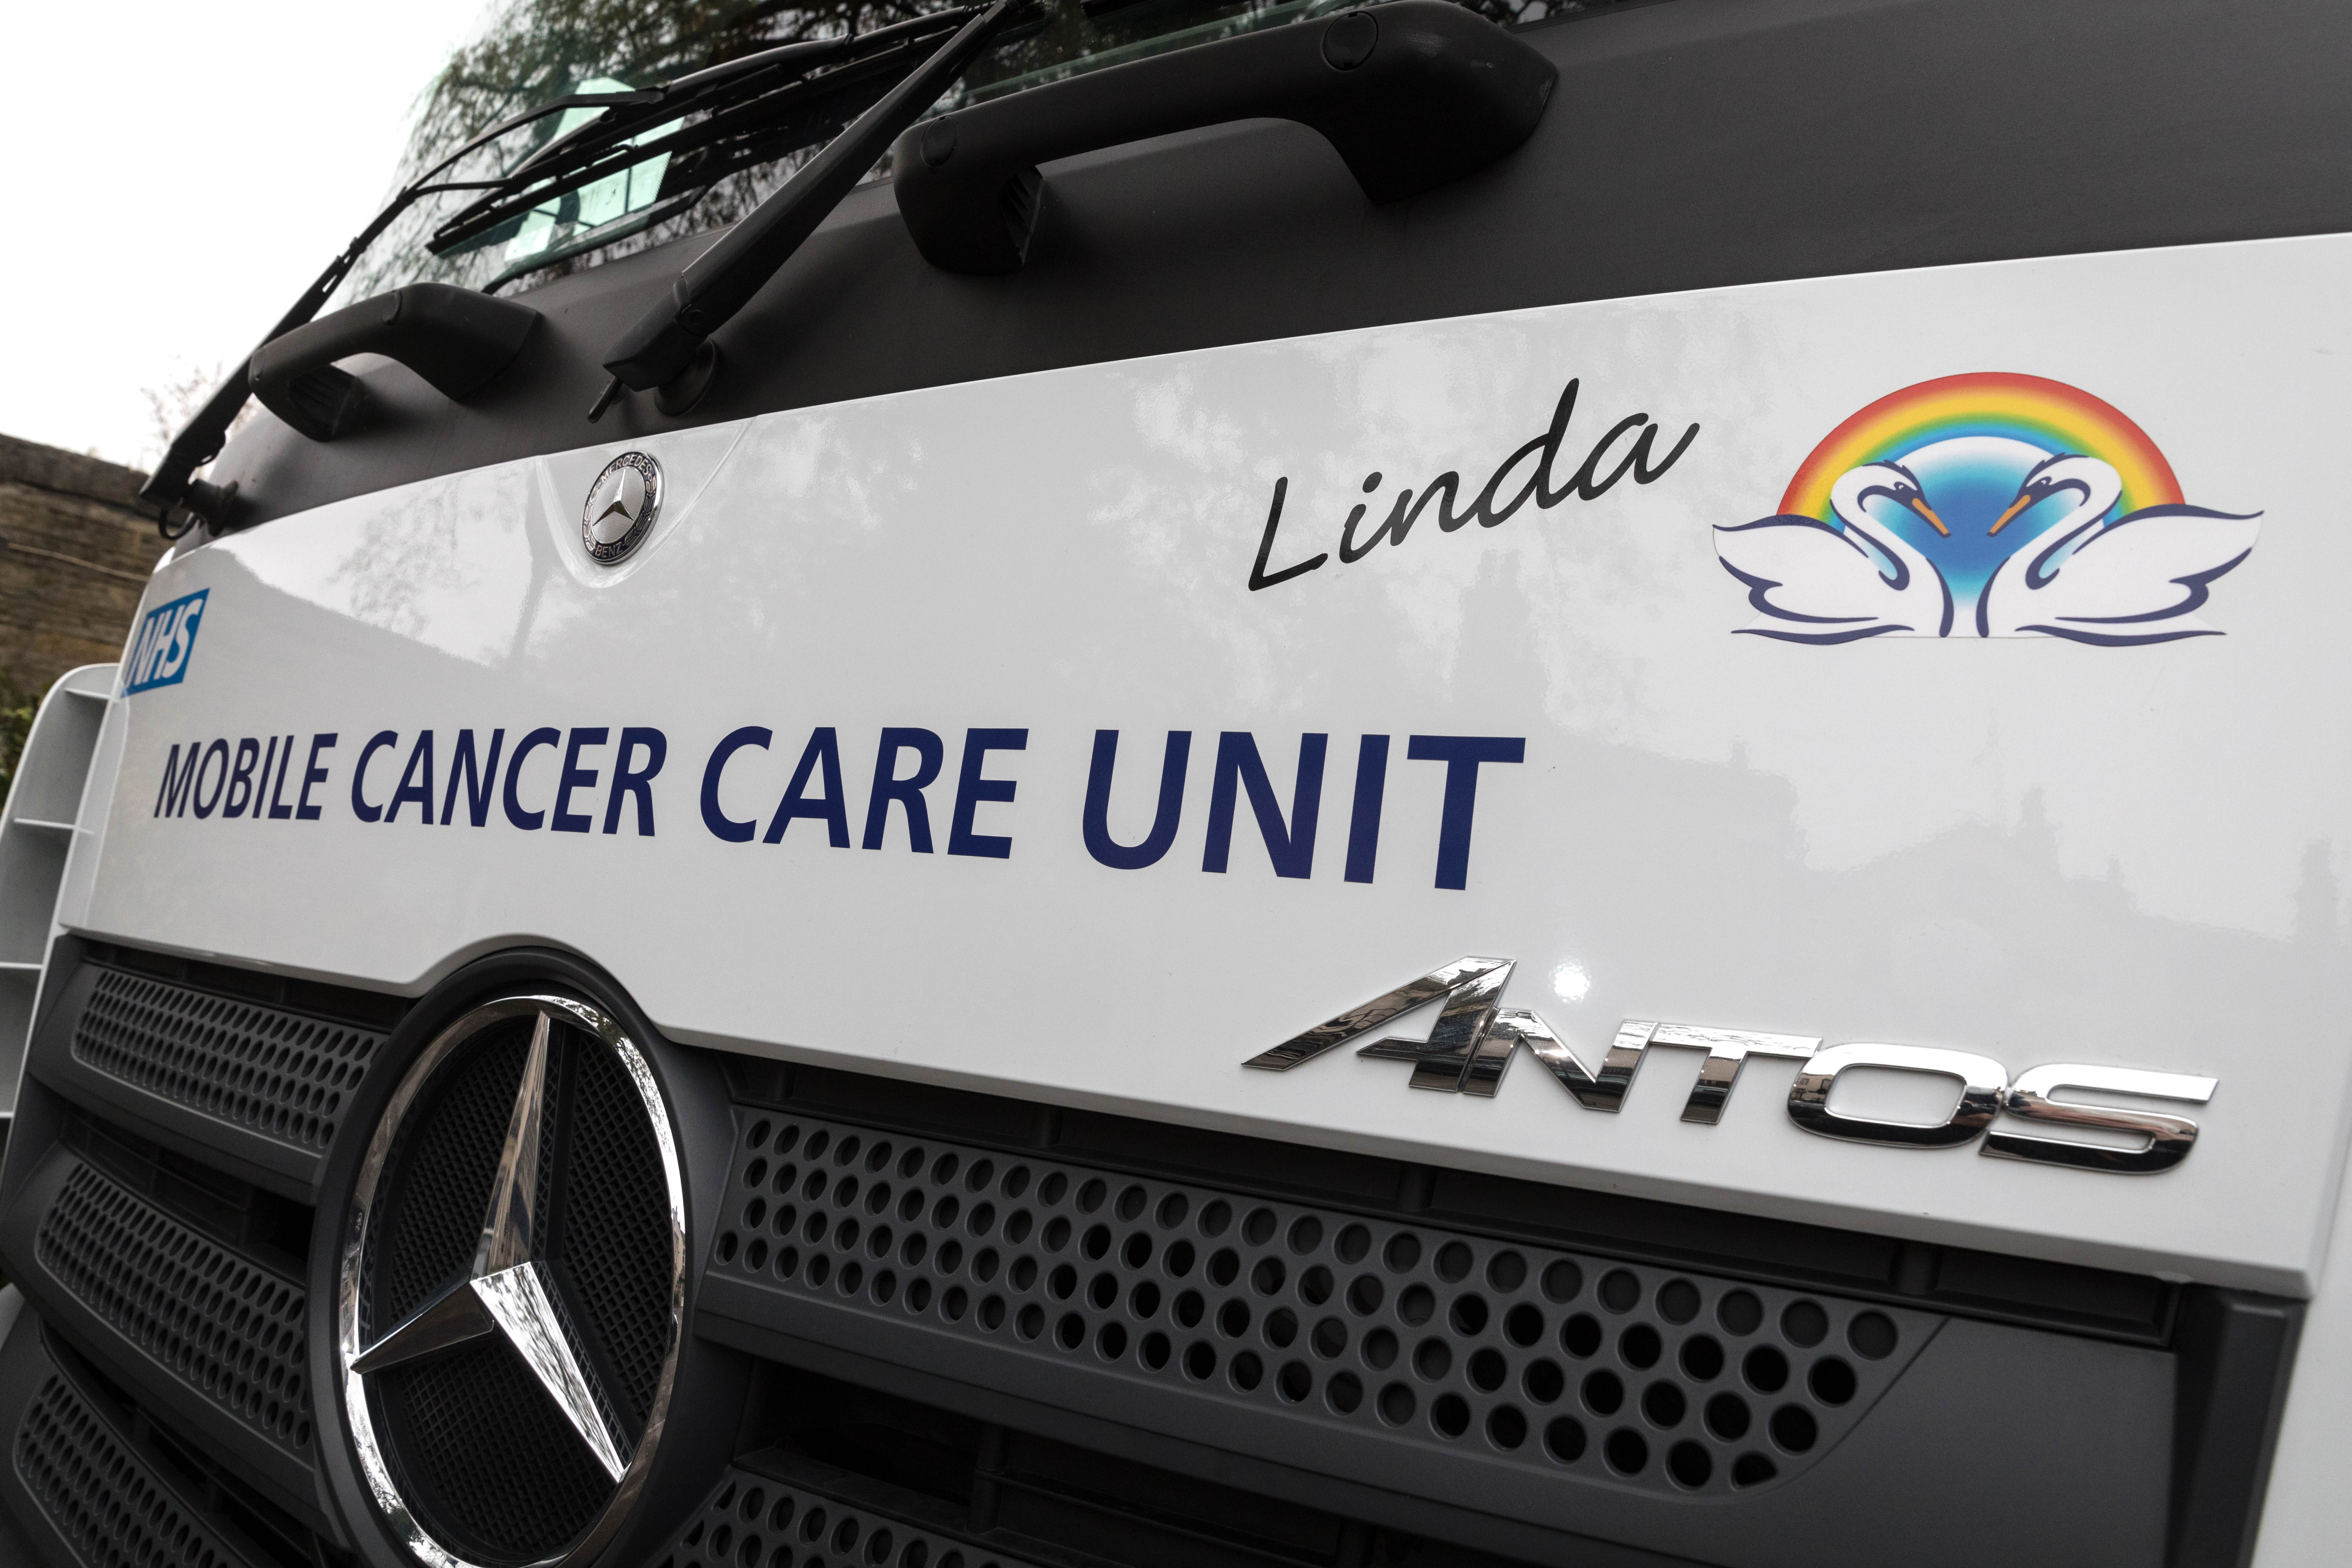 IT’S LAUNCH DAY FOR OUR WEST YORKSHIRE MOBILE CANCER CARE UNIT ‘LINDA’!